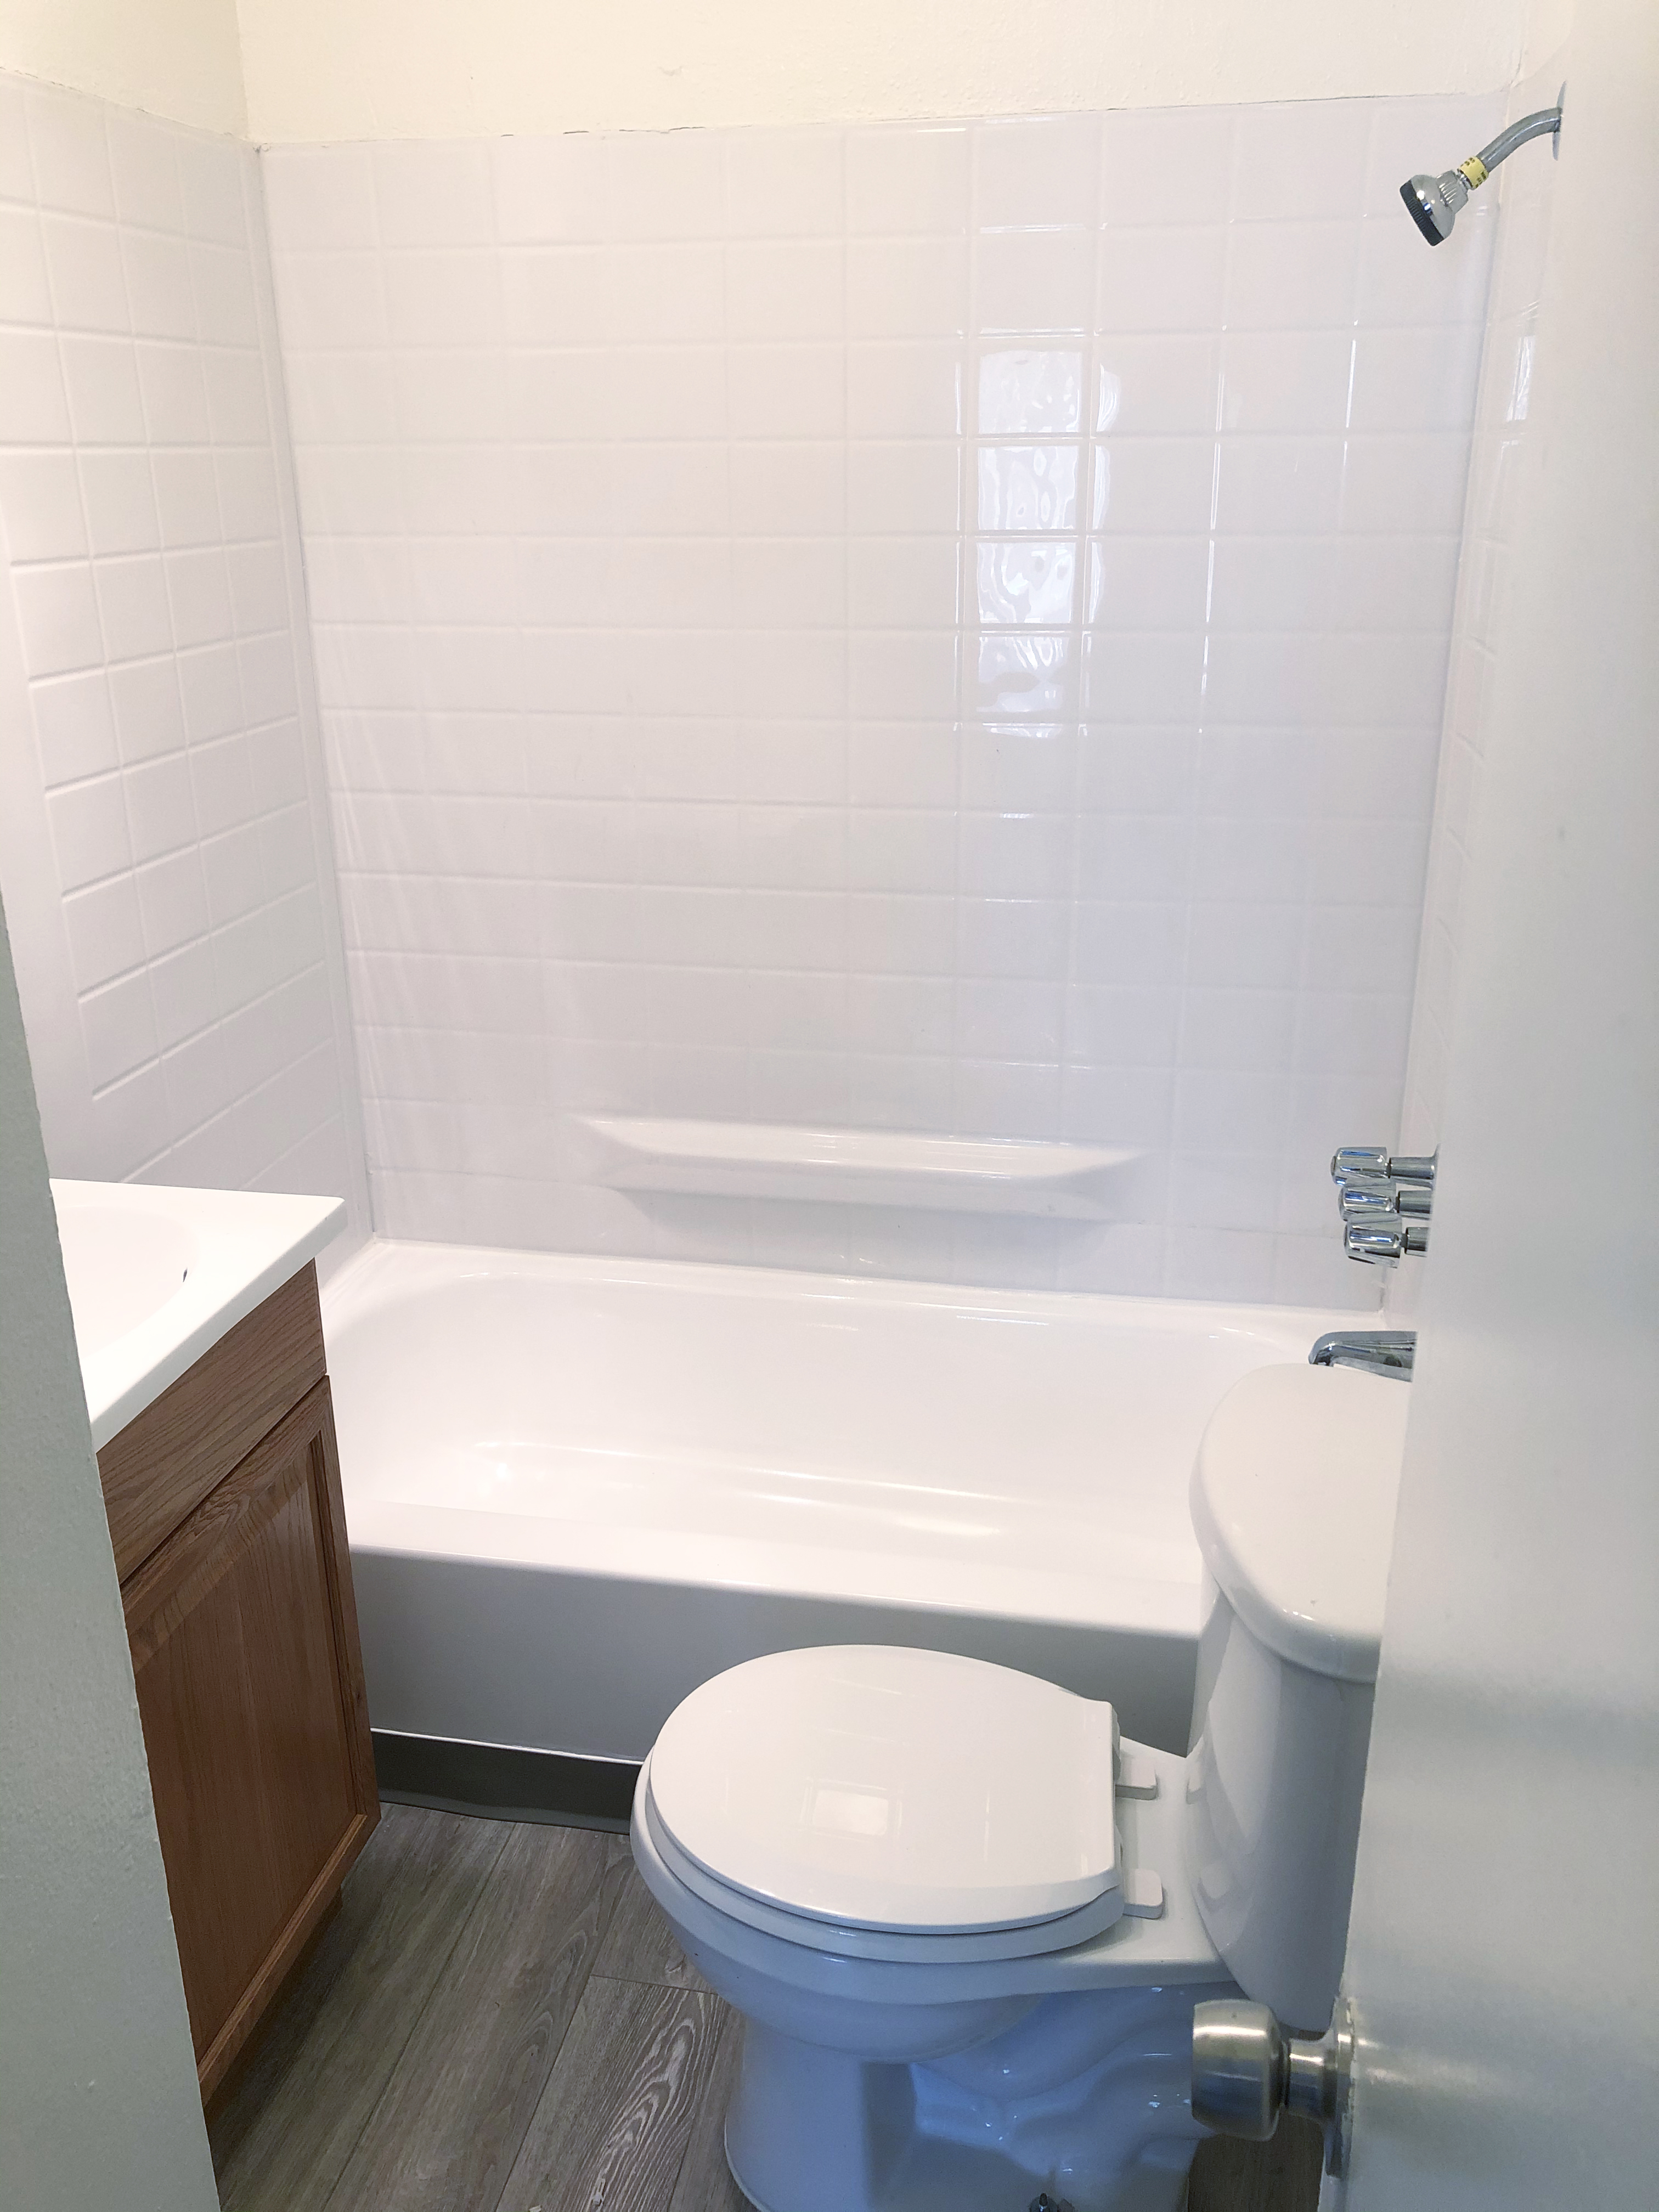 Interior view of a restroom in a unit, showing a bathtub with a shower, toilet and sink.